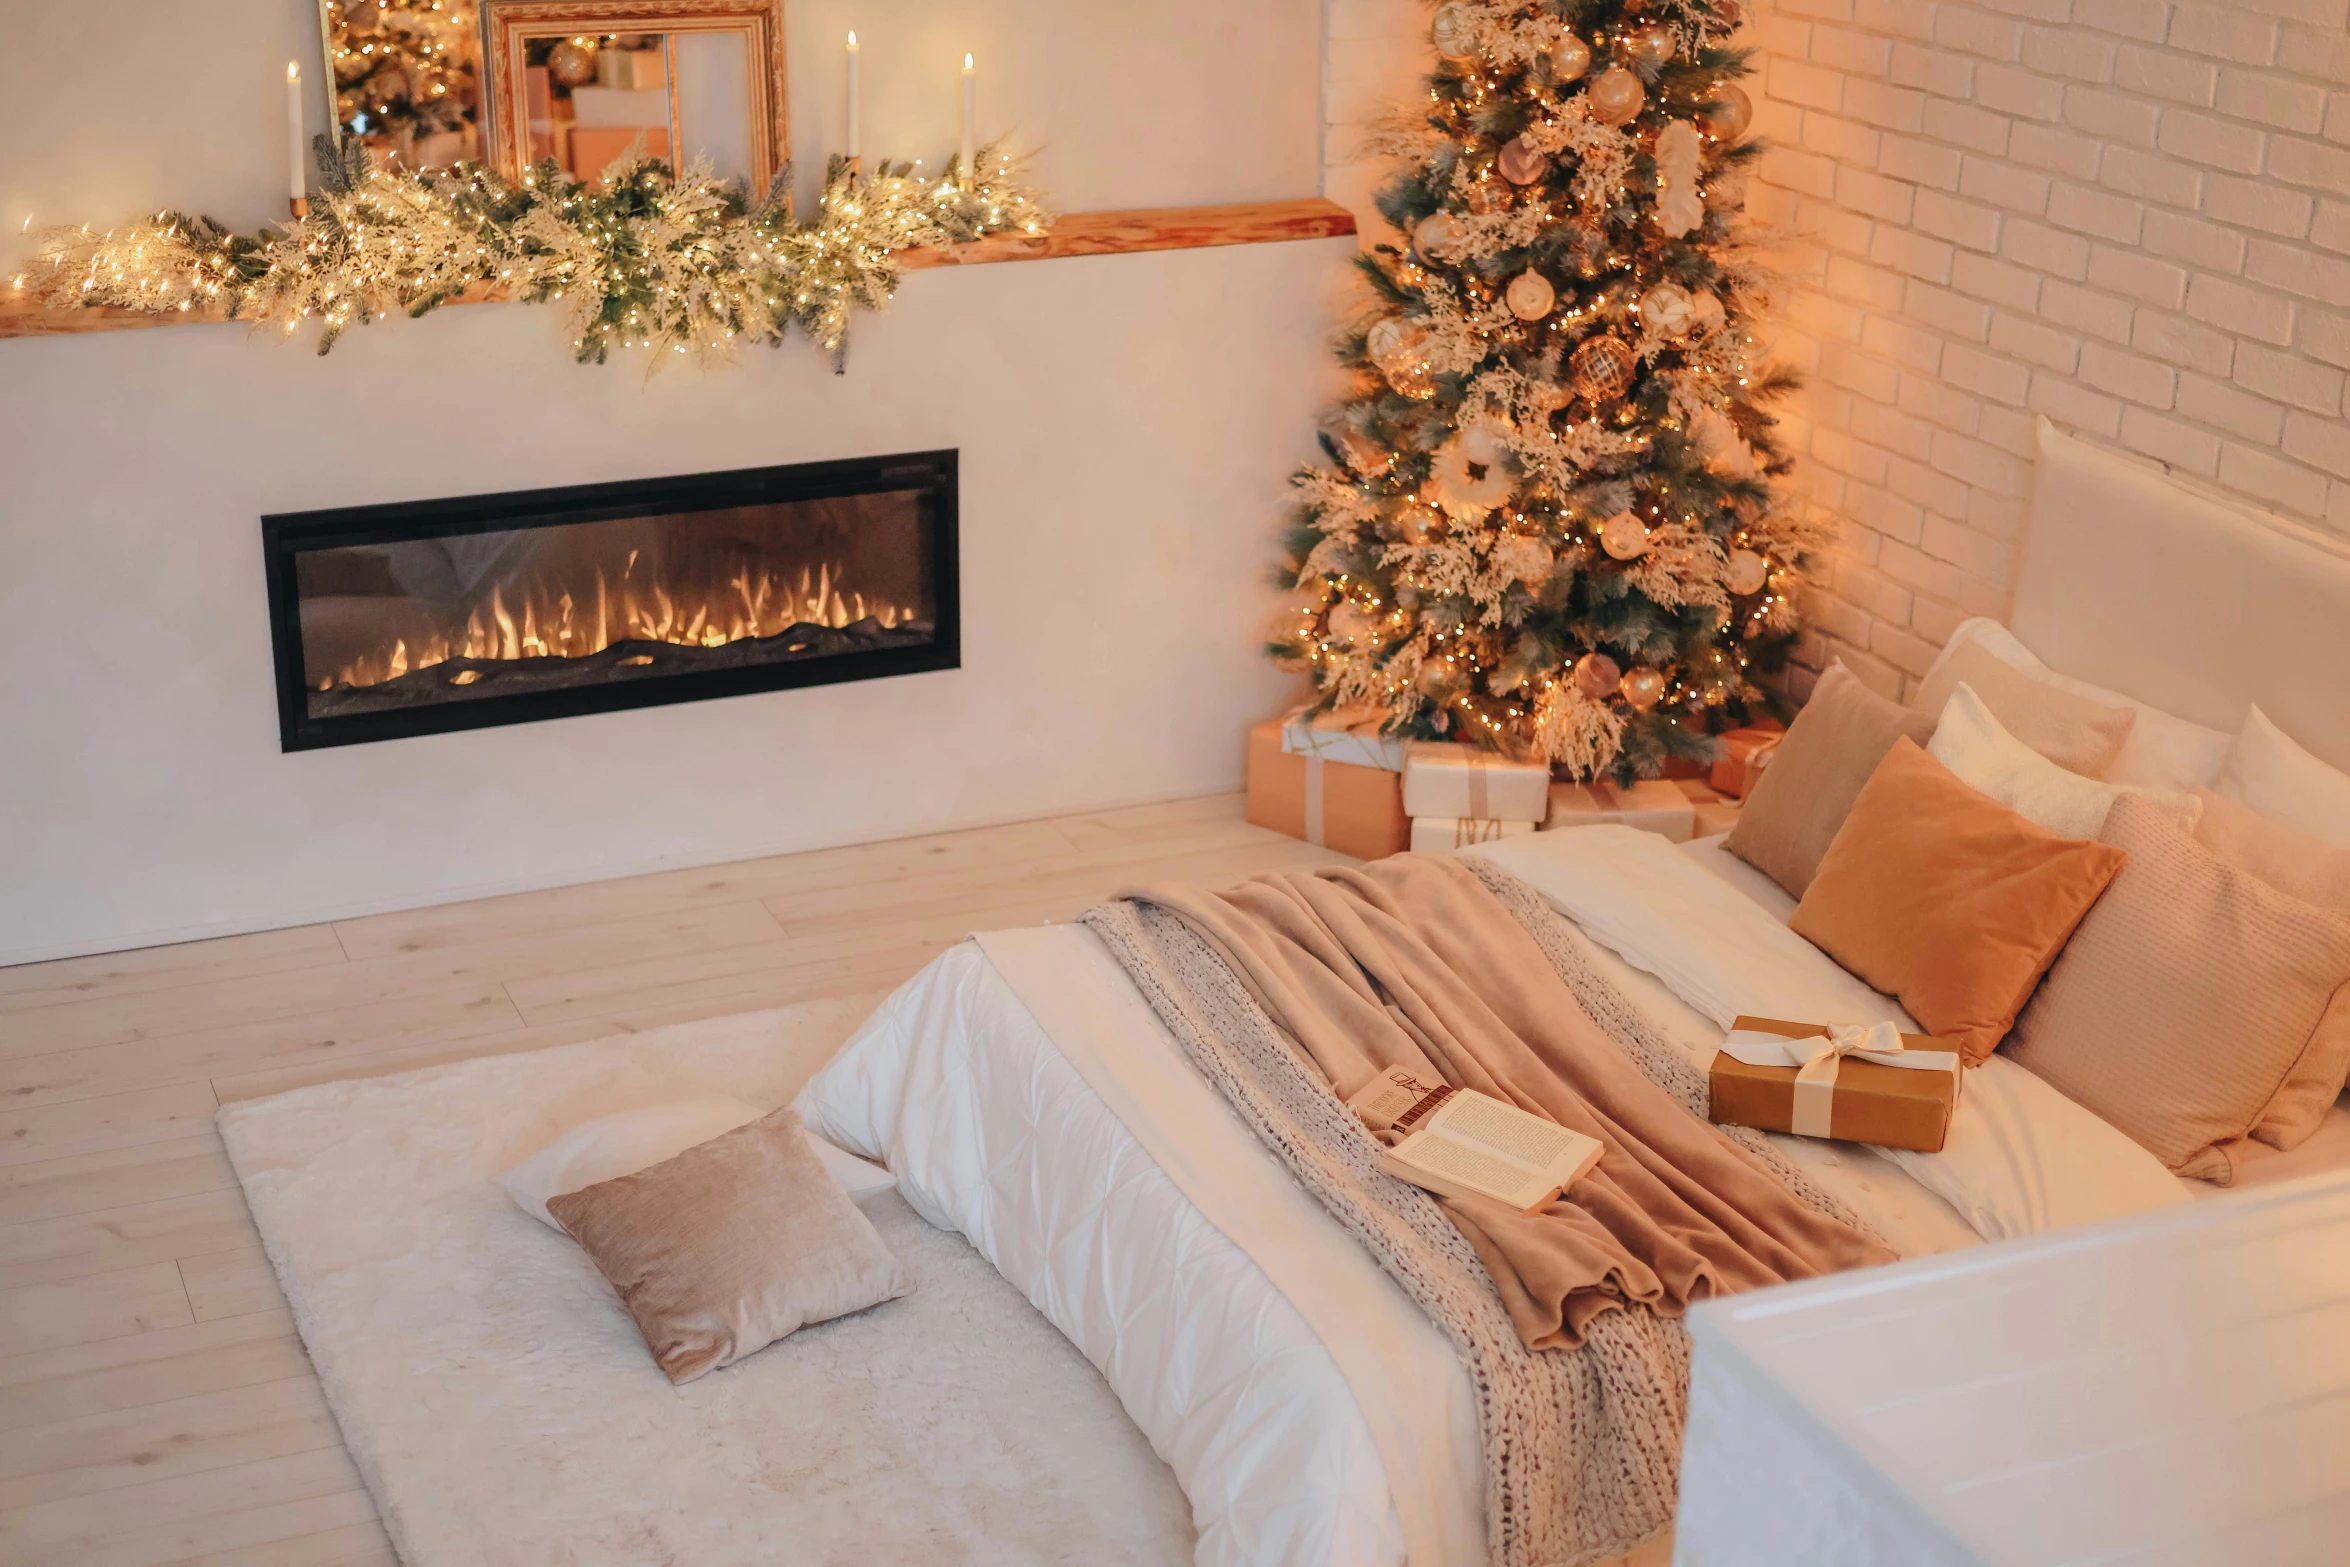 this bedroom is lit up with a white holiday tree